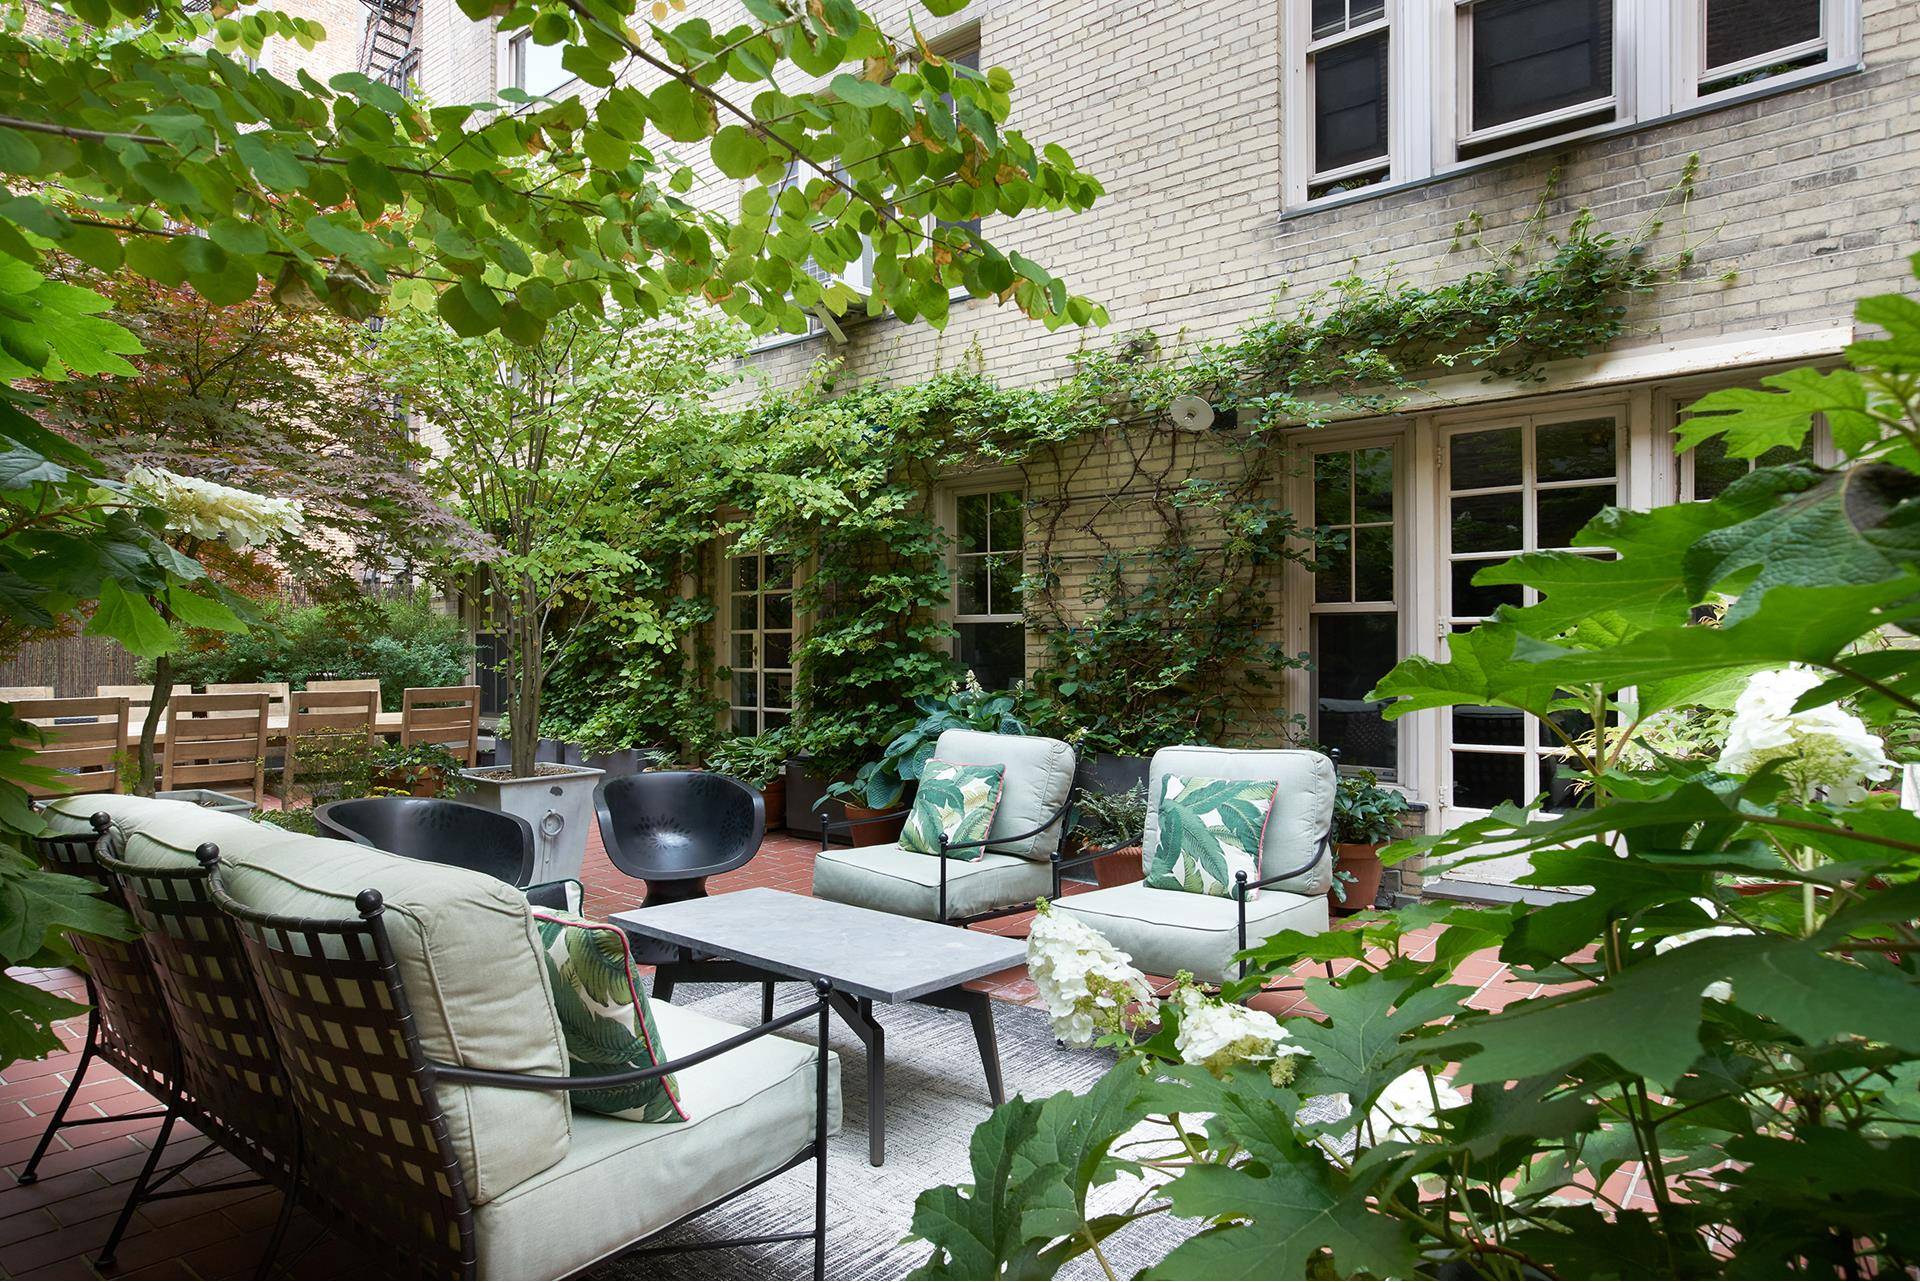 A MUST SEE GUT RENOVATED JEWEL BOX TWO BEDROOM TWO BATHROOM WEST VILLAGE FULL SERVICE CONDOMINIUM HOME WITH AN EXTENSIVE PRIVATE GARDEN !